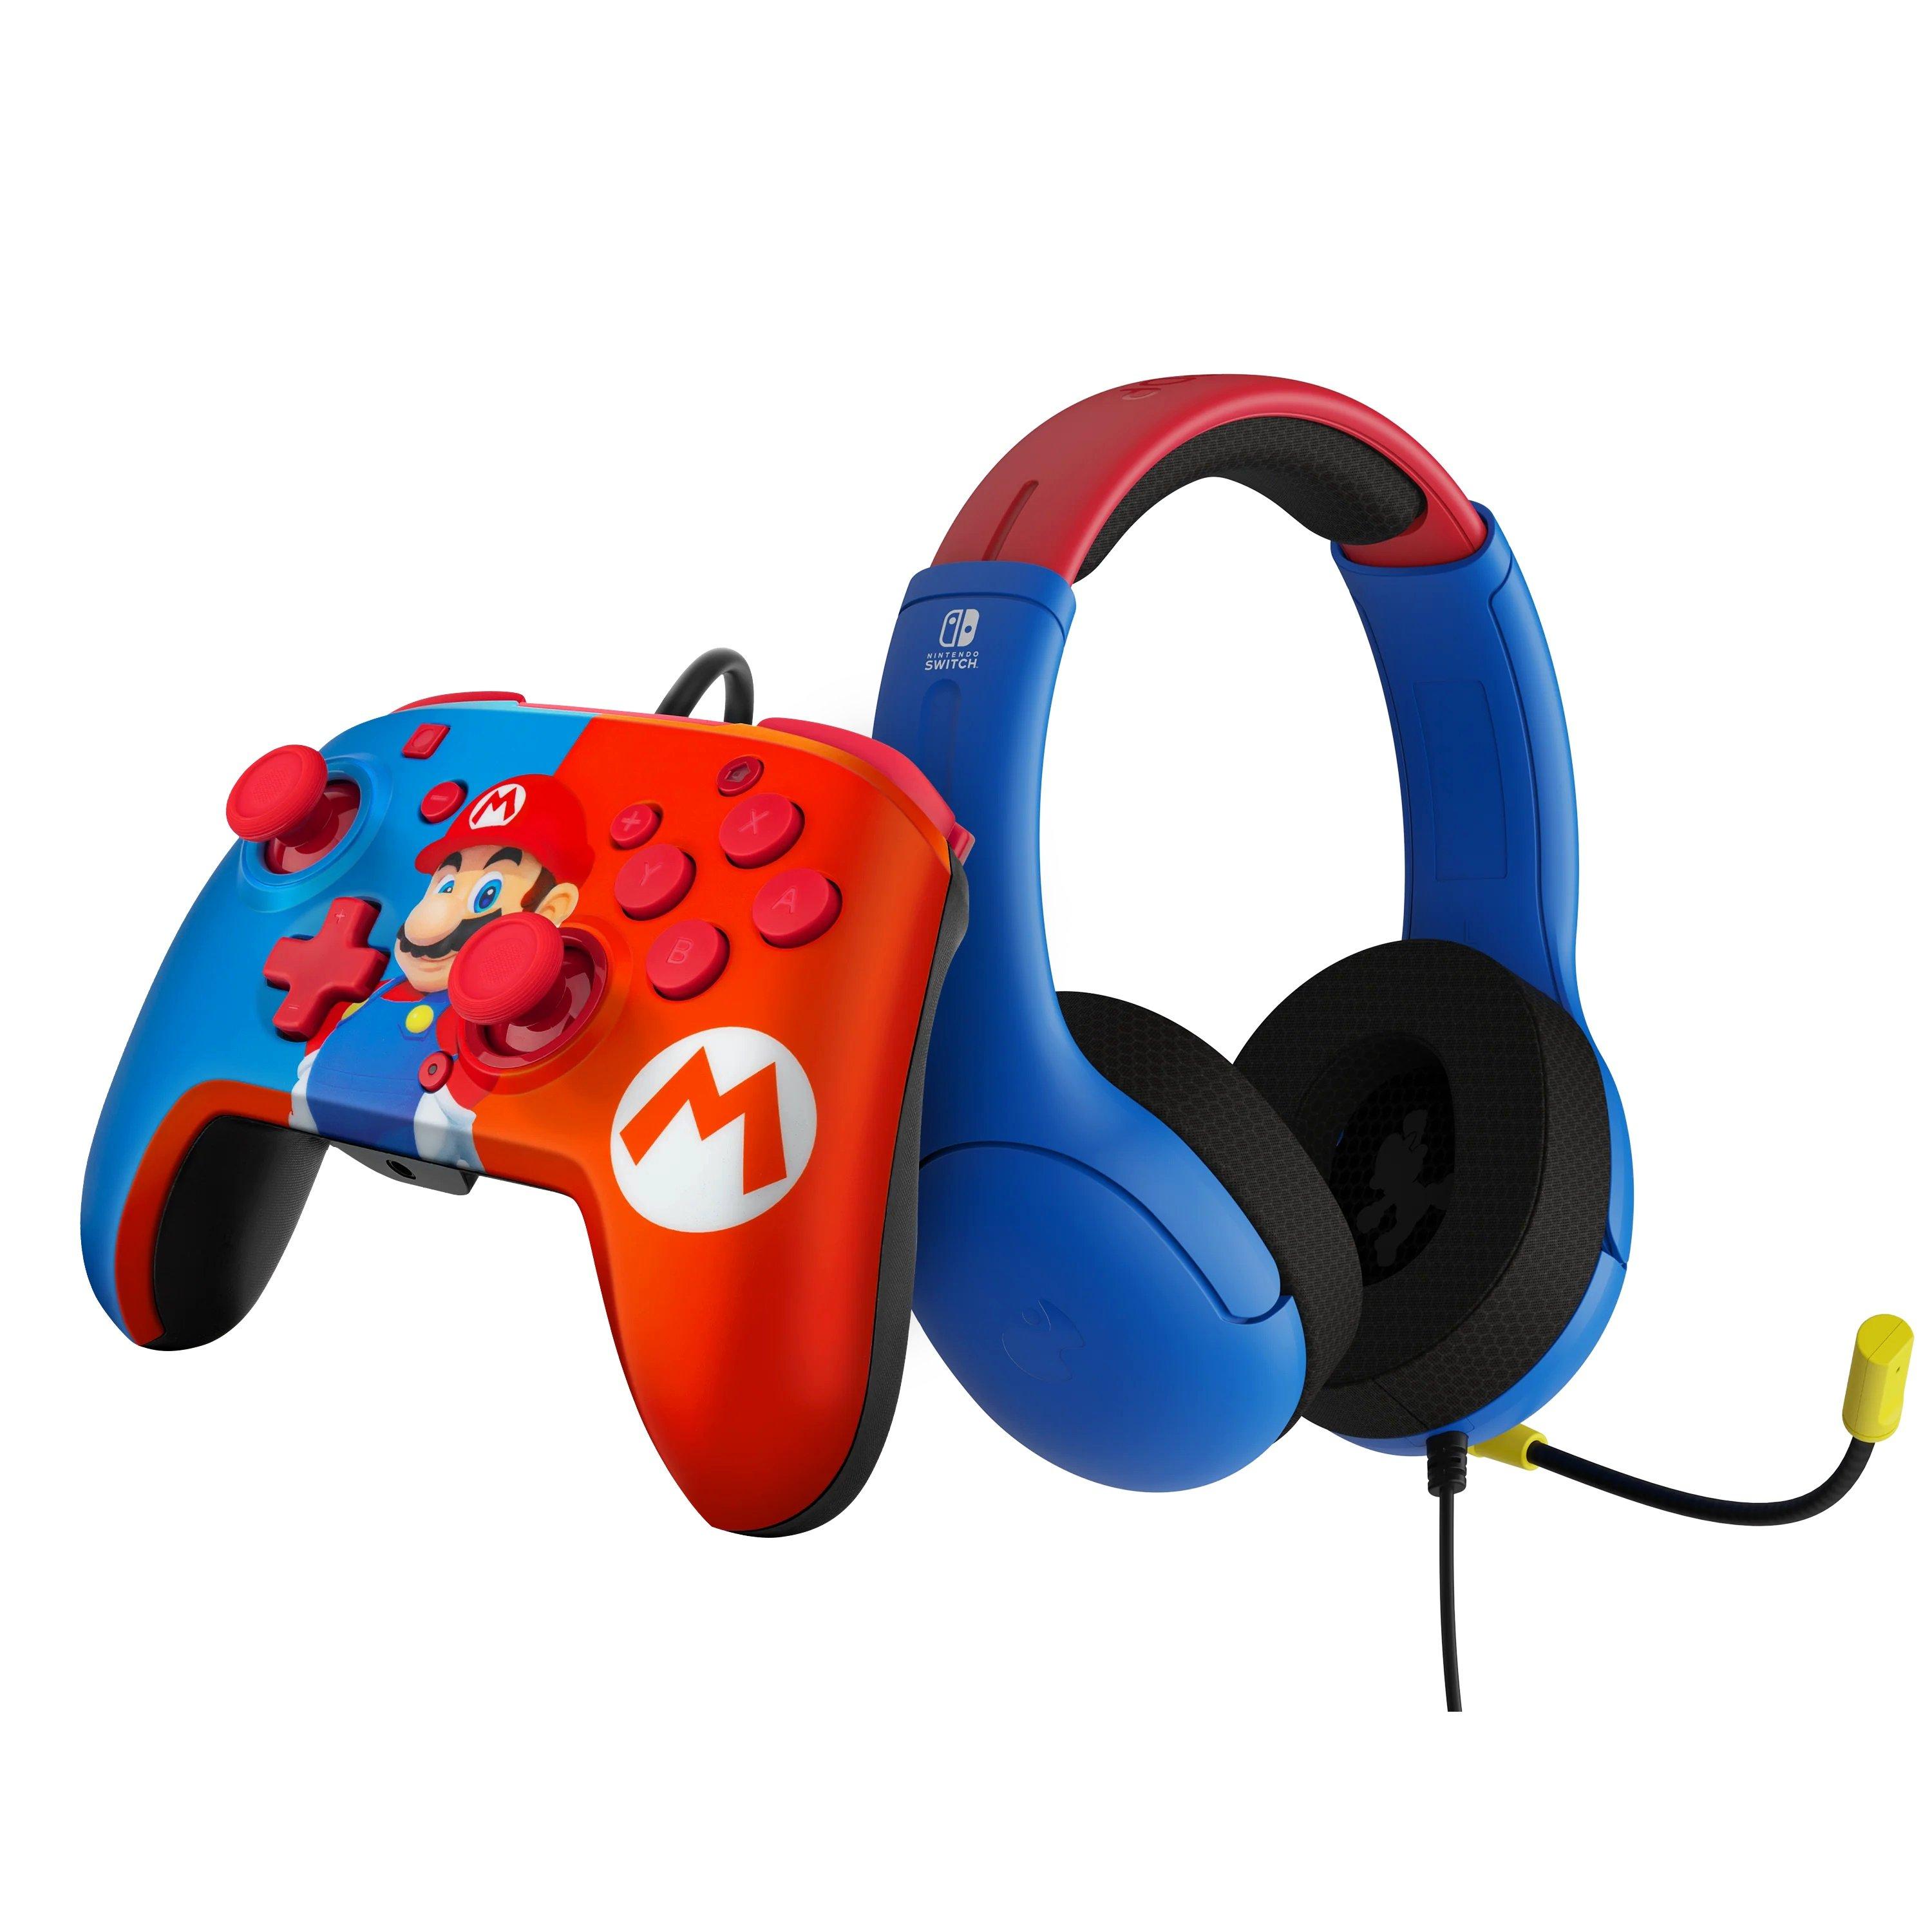 PDP AIRLITE Wired Headset and REMATCH Wired Controller Bundle for Nintendo  Switch - Mario Dash | GameStop